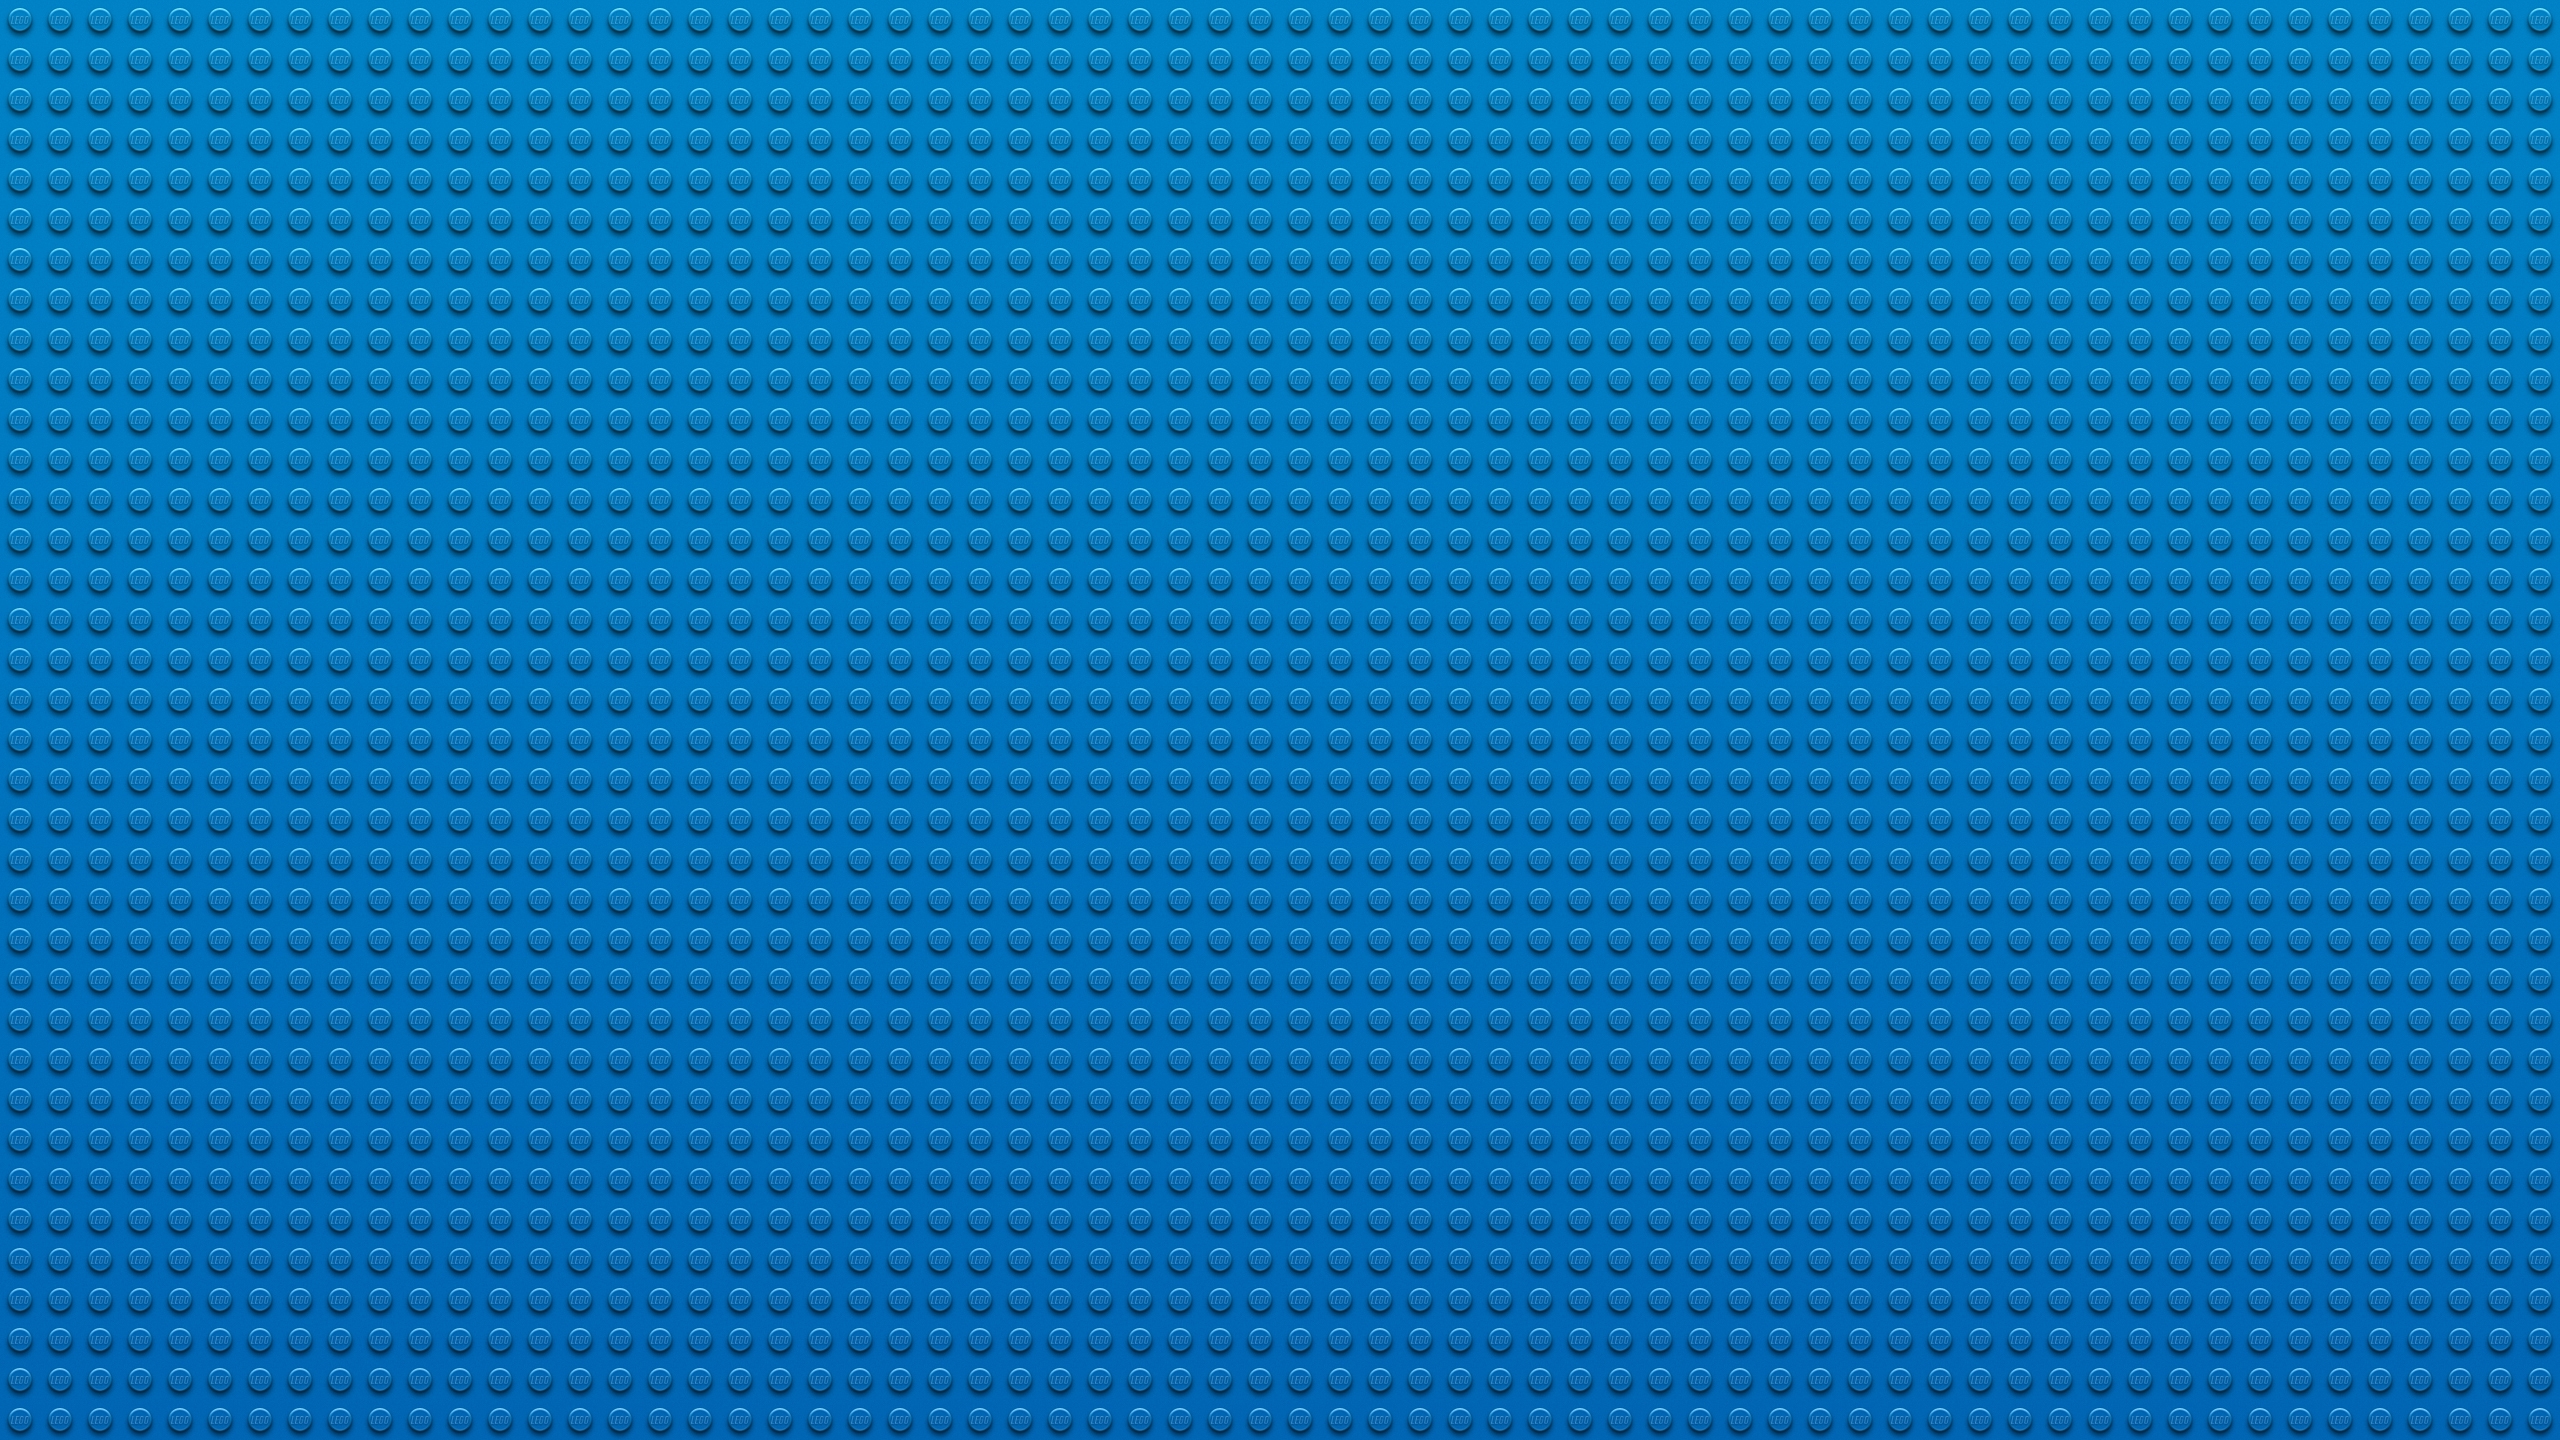 Lego Texture for 2560x1440 HDTV resolution